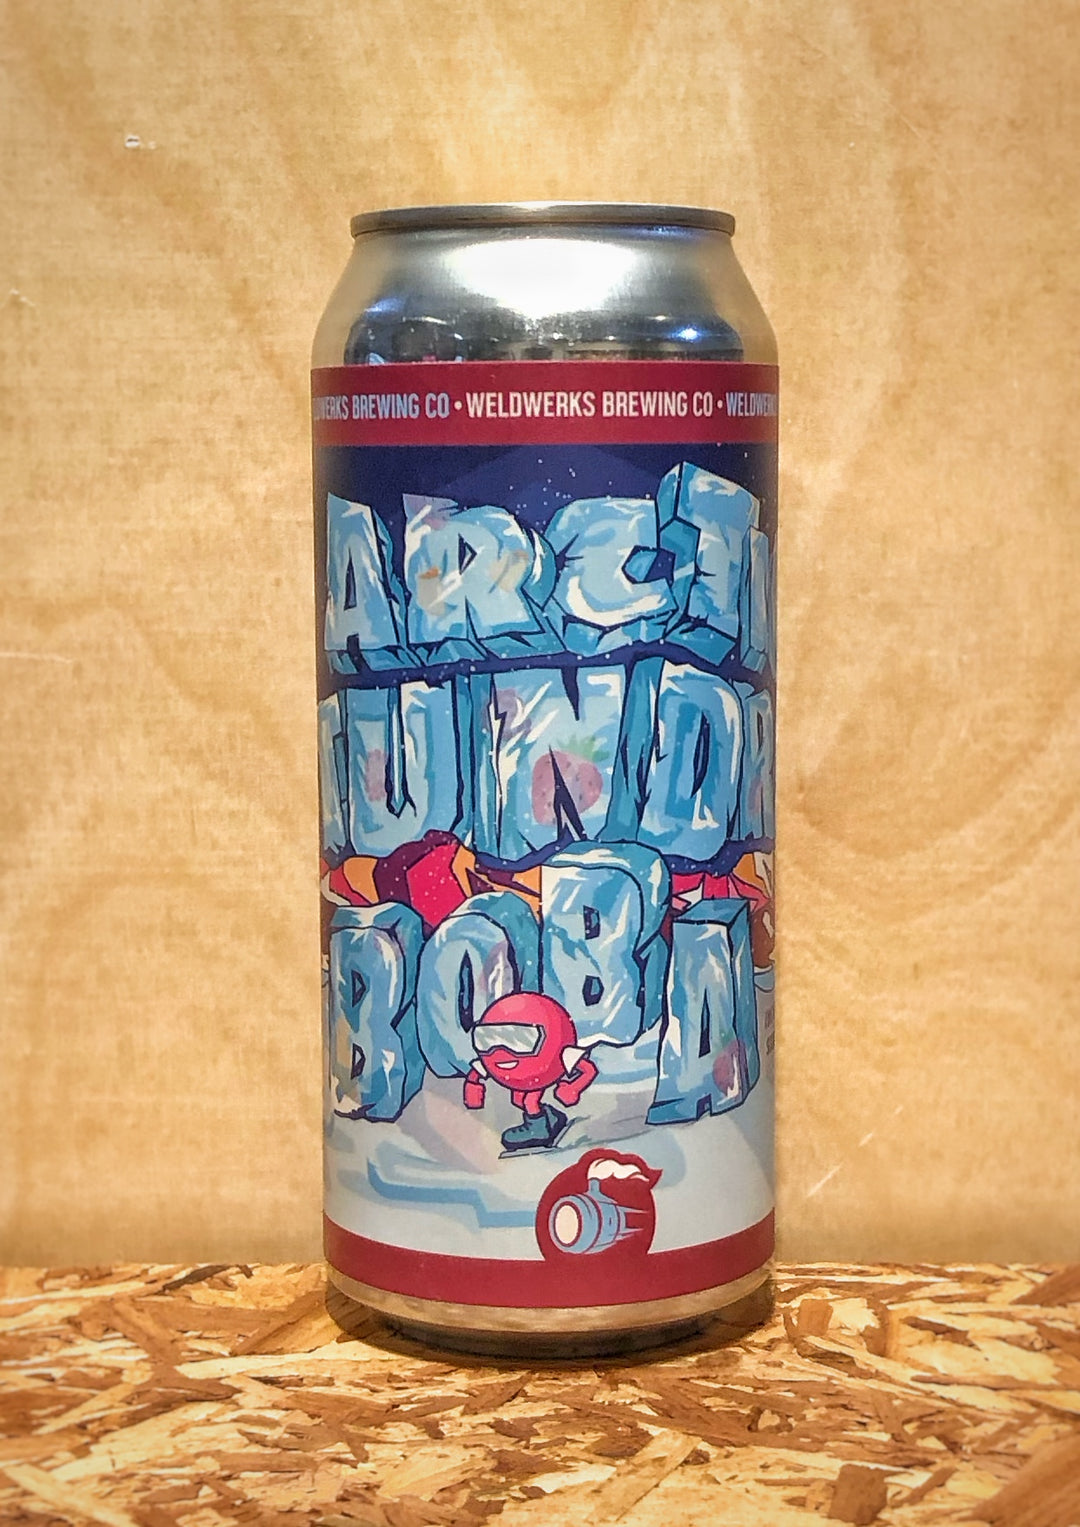 WeldWerks Brewing Co. 'Arctic Tundra Boba' Imperial Sour Ale with Strawberry, Peach, & Raspberry Boba Syrups (Greeley, CO)